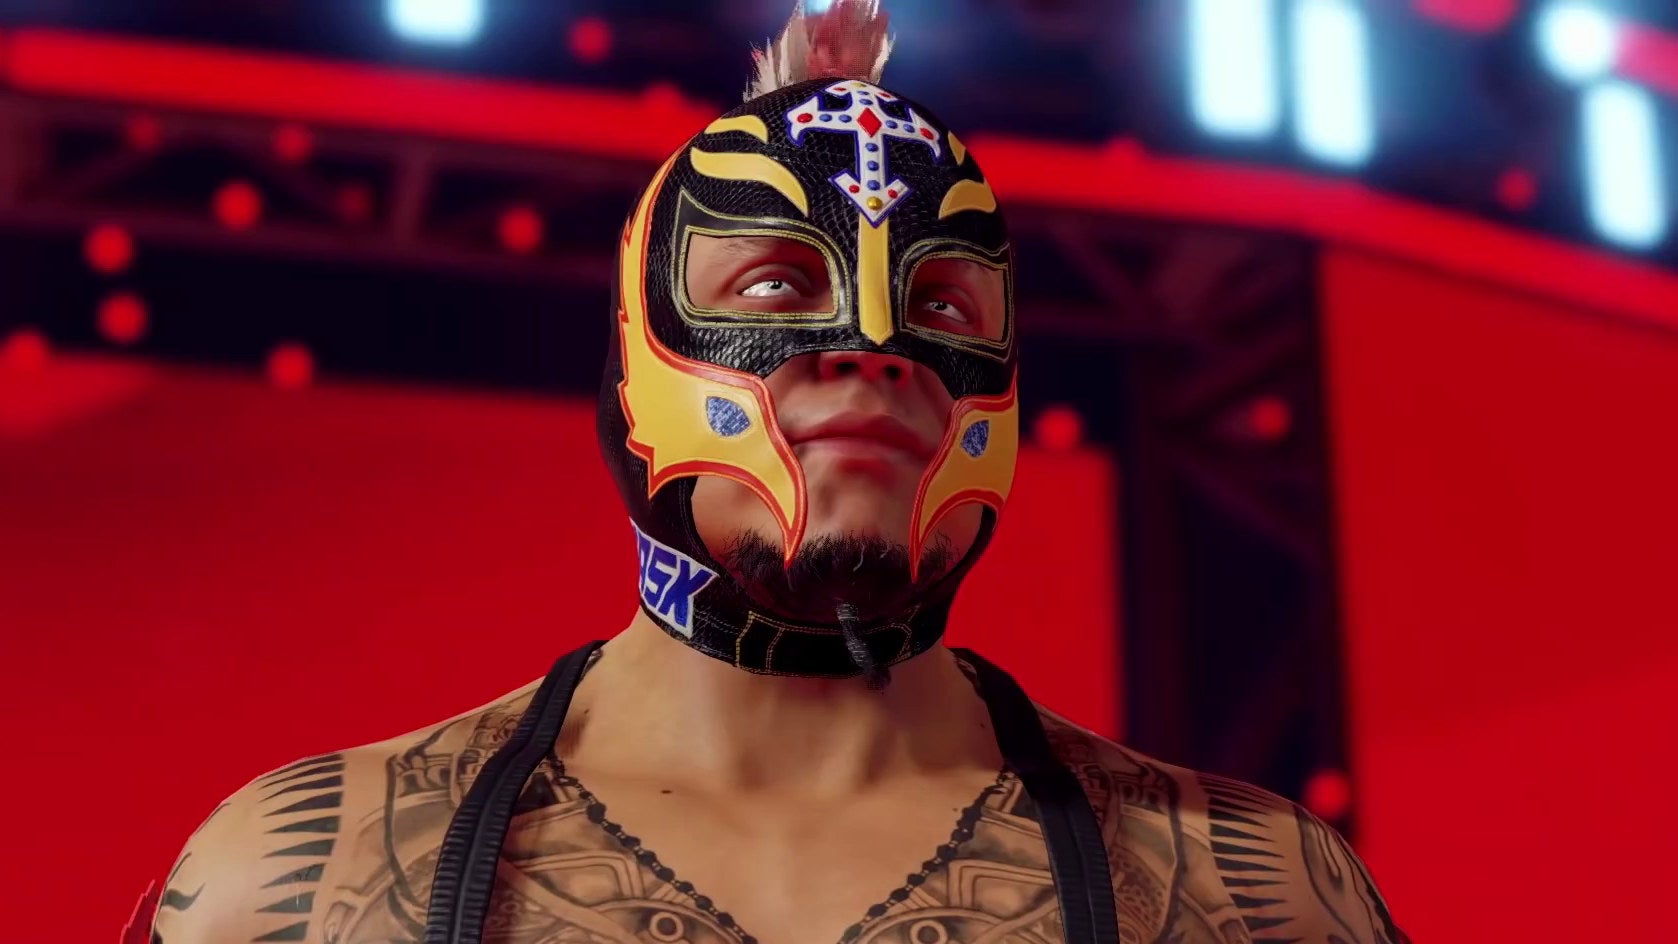 Rey Mysterio in a frame from the WWE 2K22 announcement trailer.